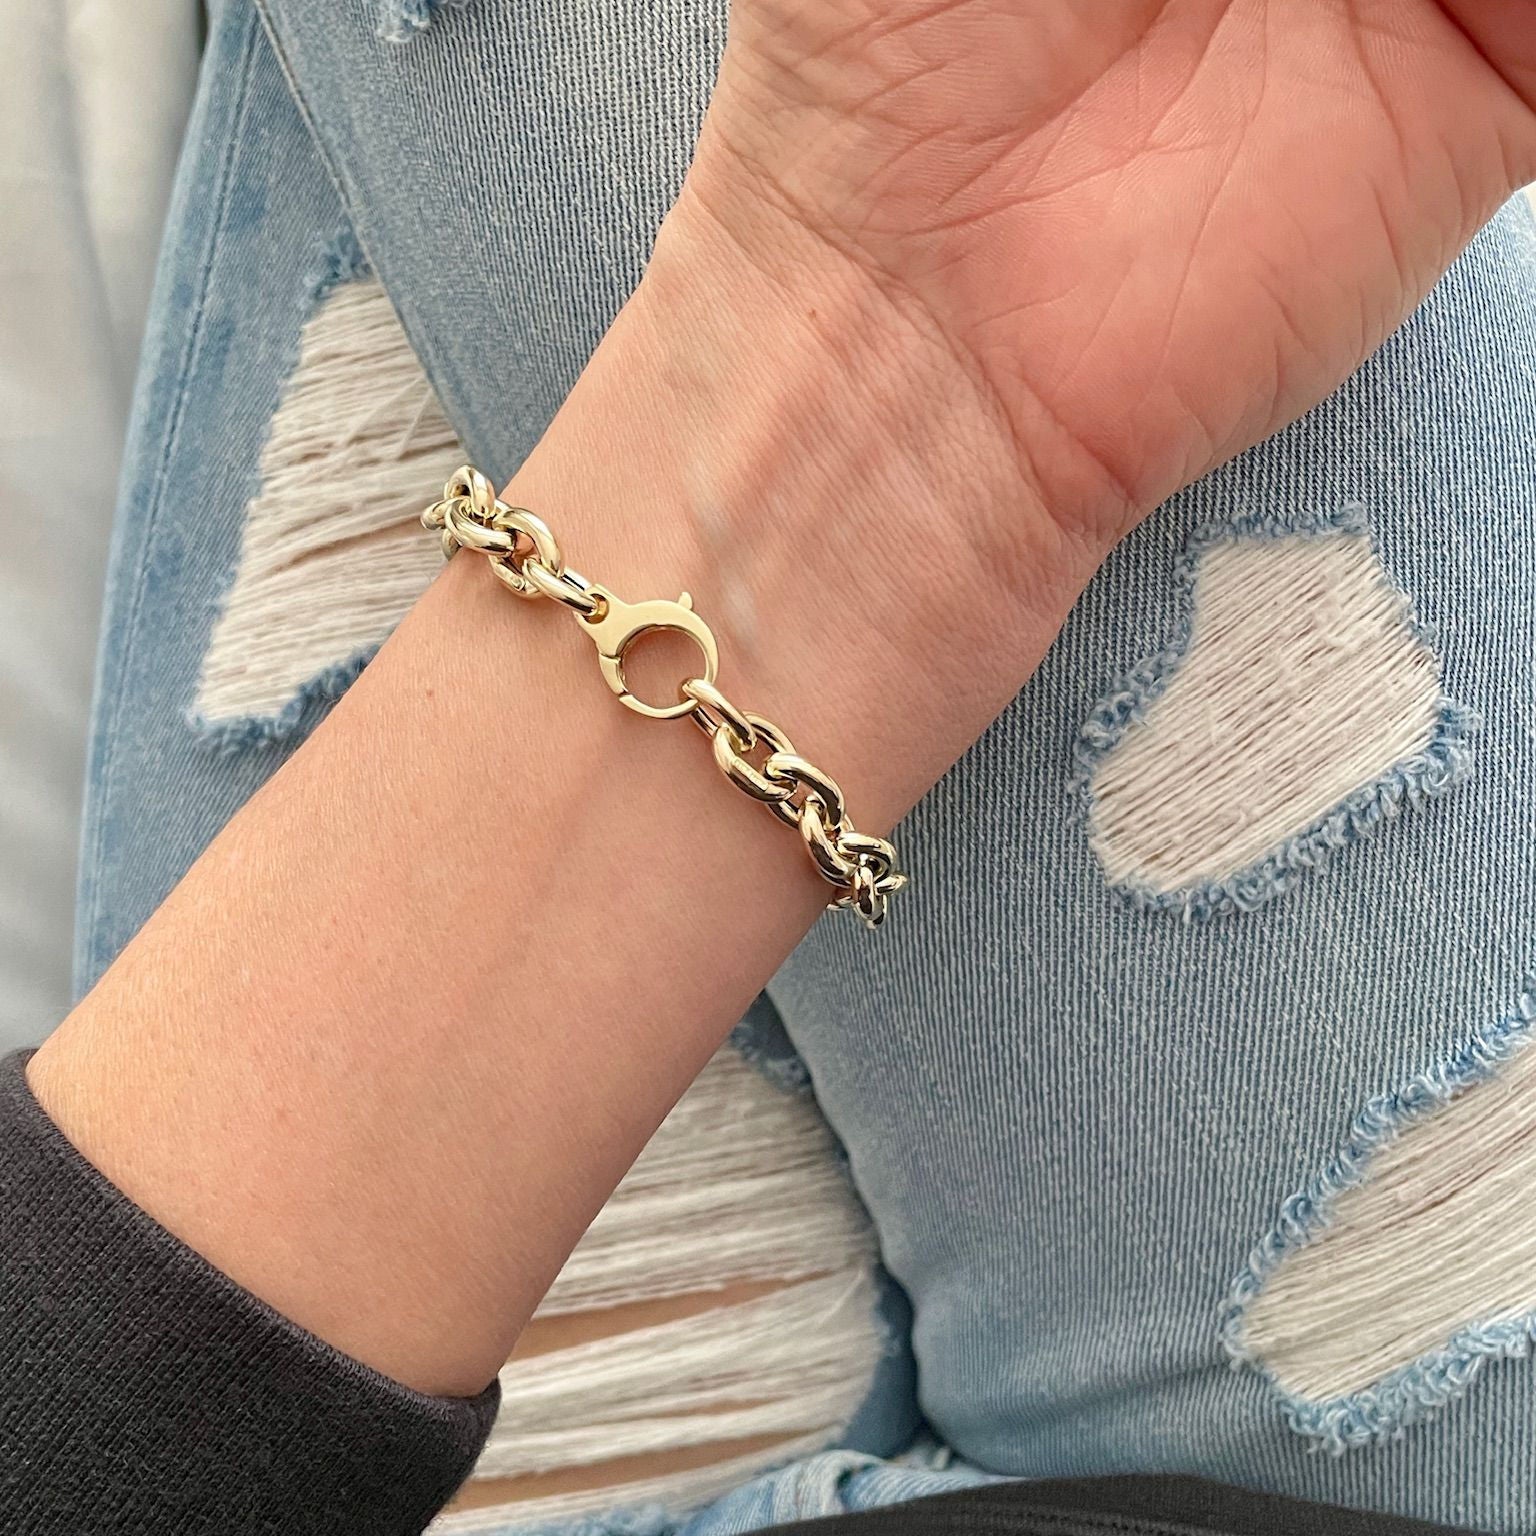 14K YELLOW GOLD THICK ROLO LINK BRACELET